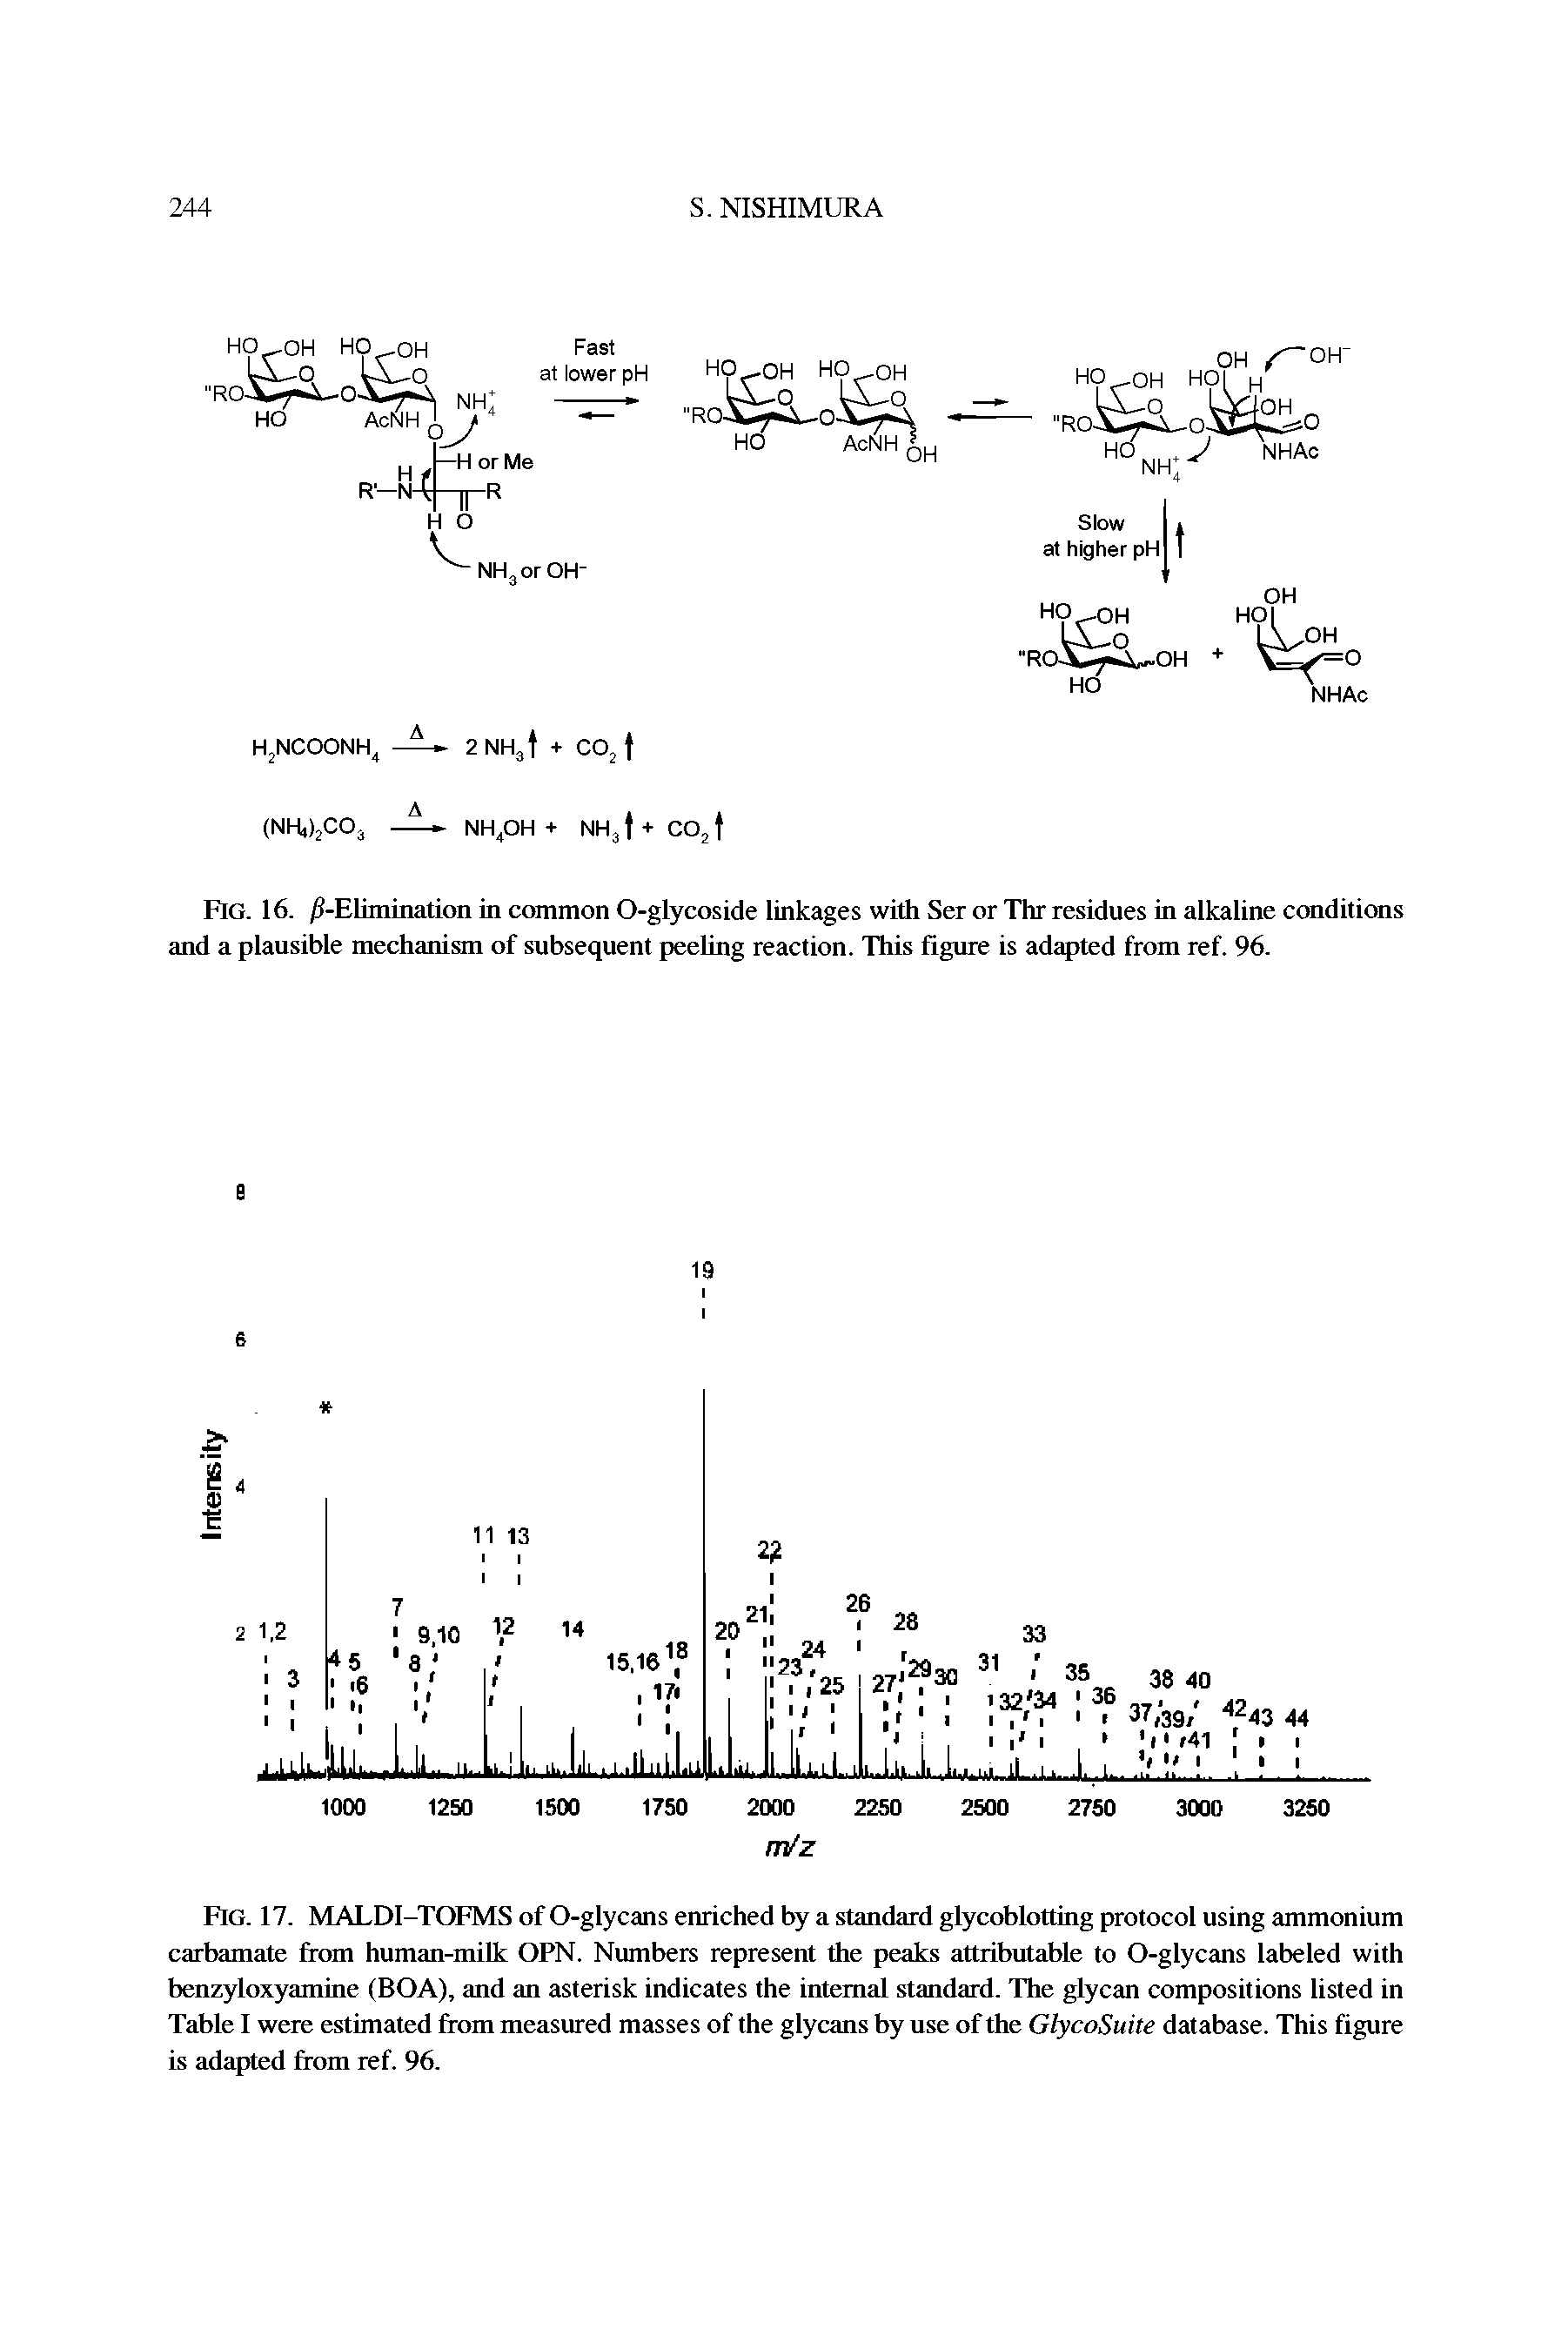 Fig. 17. MALDI-TOFMS of O-glycans enriched by a standard glycoblotting protocol using ammonium carbamate from human-milk OPN. Numbers represent the peaks attributable to O-glycans labeled with benzyloxyamine (BOA), and an asterisk indicates the internal standard. The glycan compositions listed in Table I were estimated from measured masses of the glycans by use of the GlycoSuite database. This figure is adapted from ref. 96.